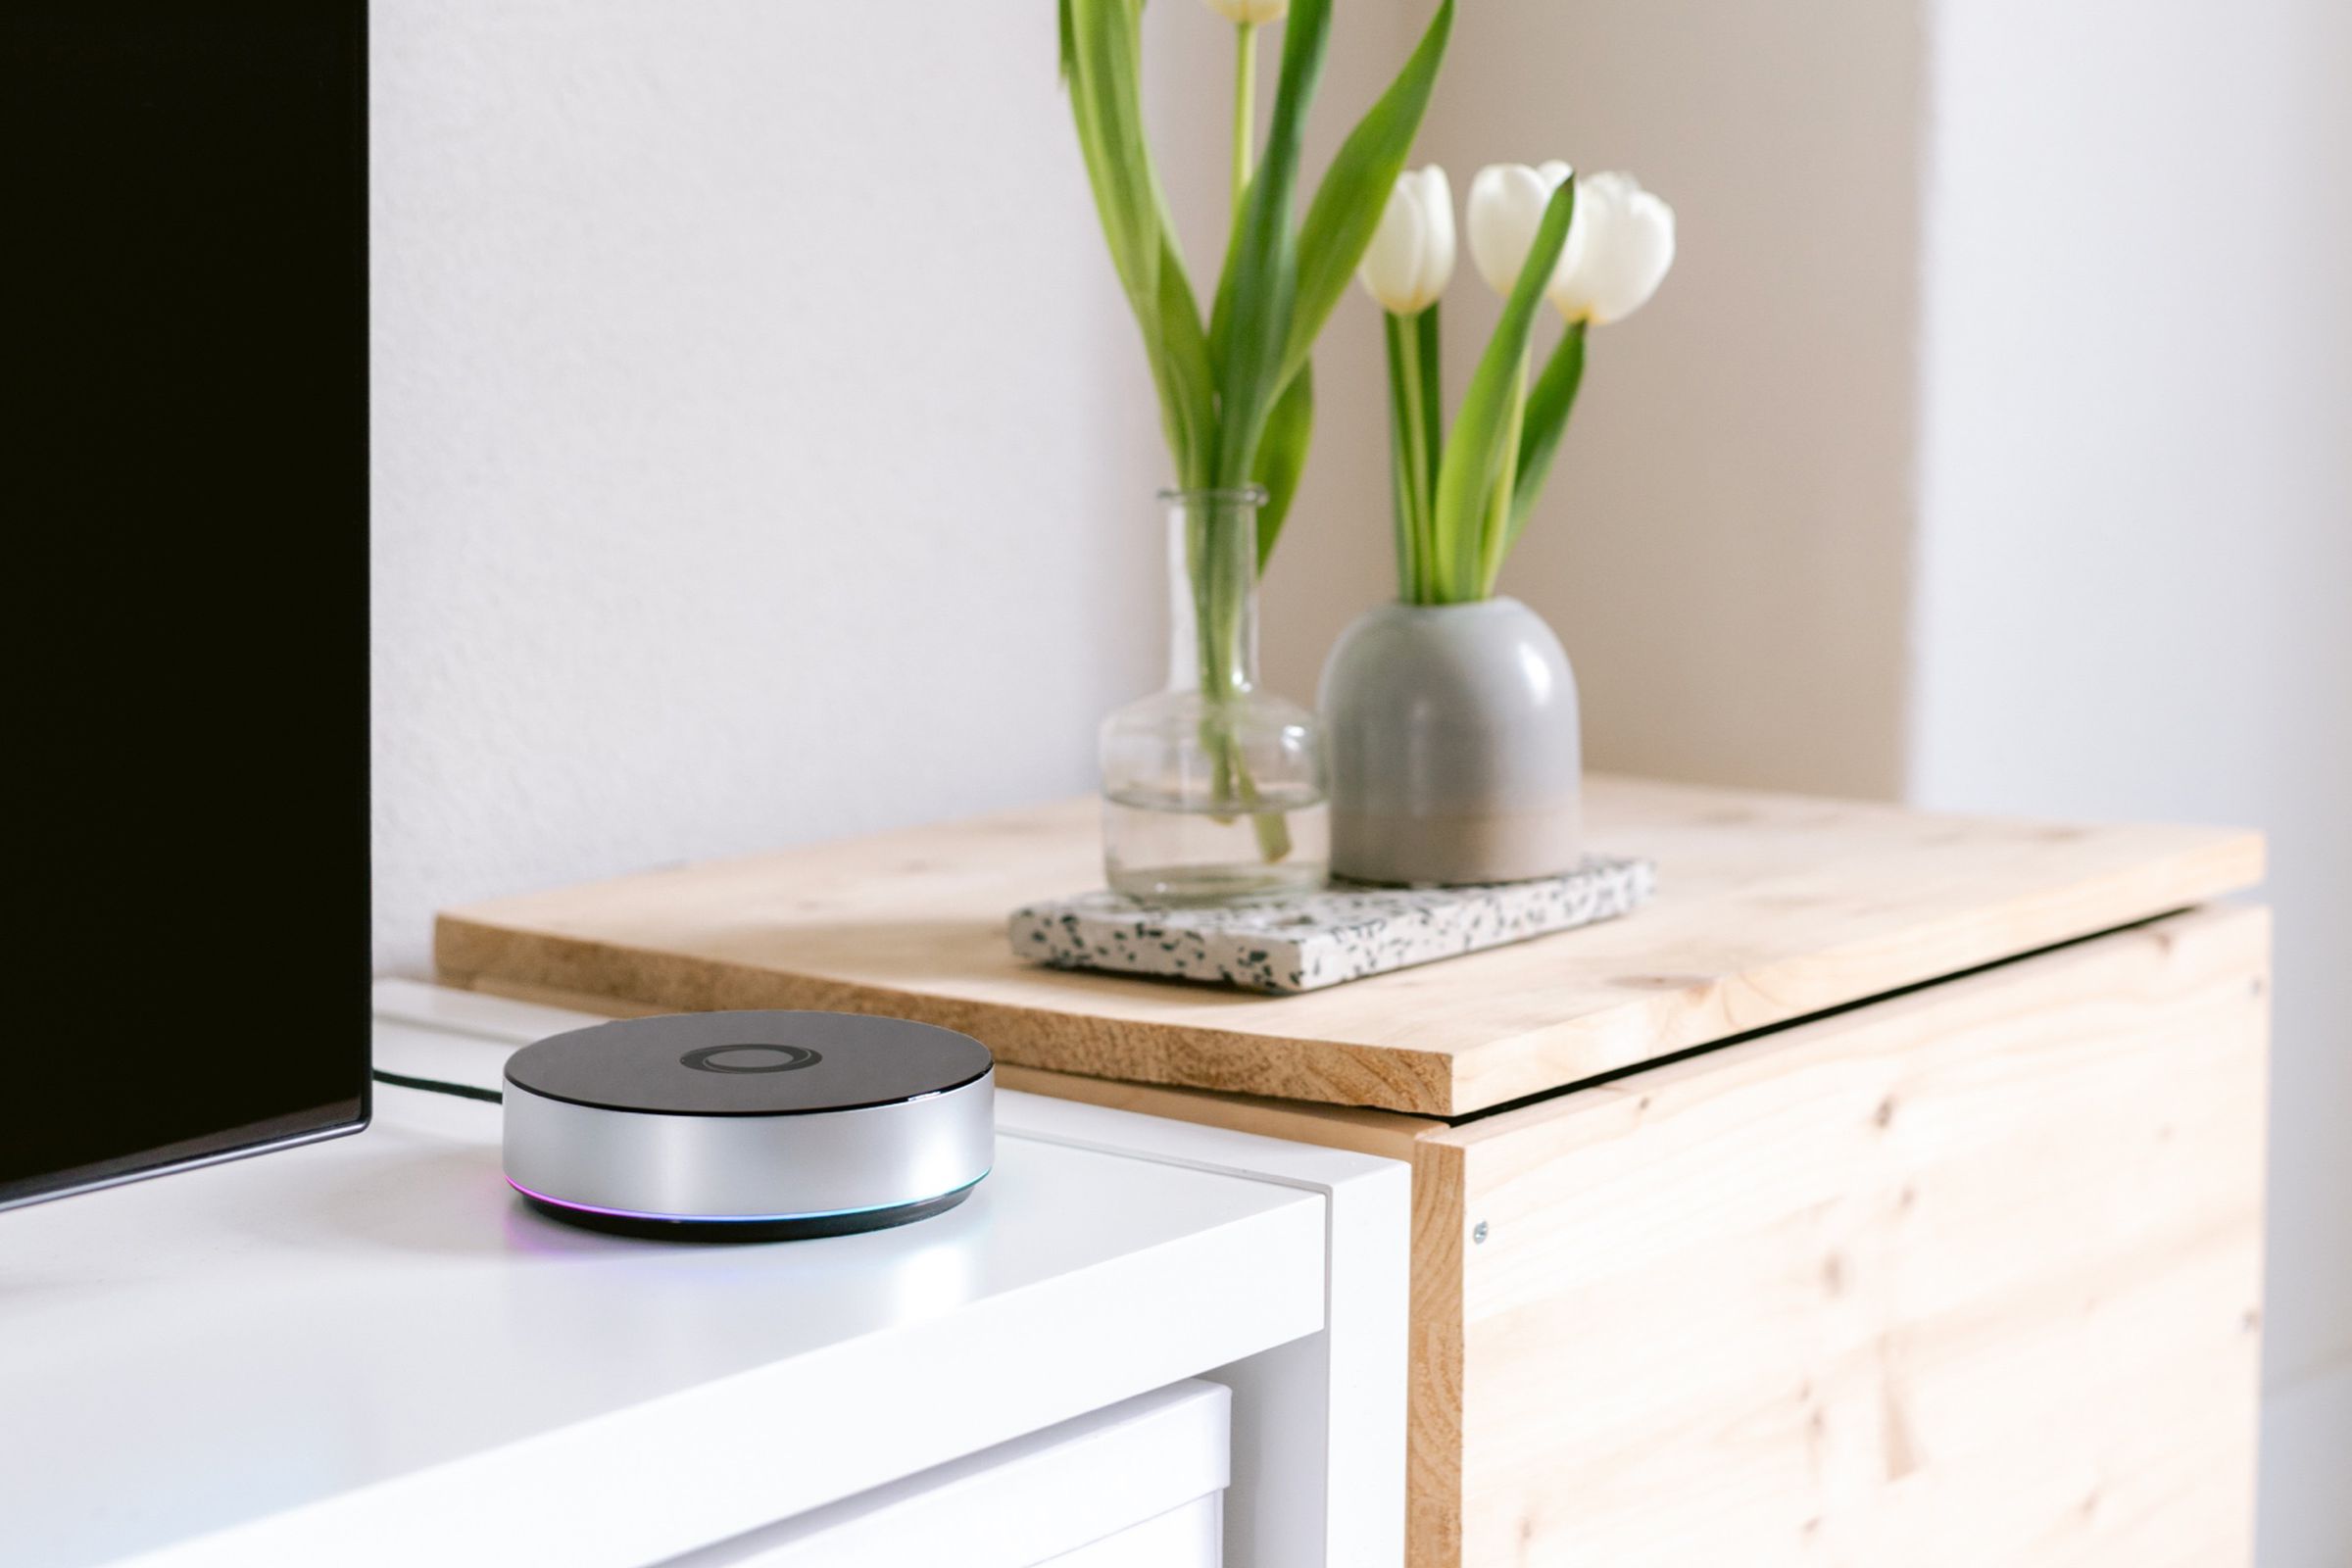 The Homey Bridge is the newest smart home hub on the block.